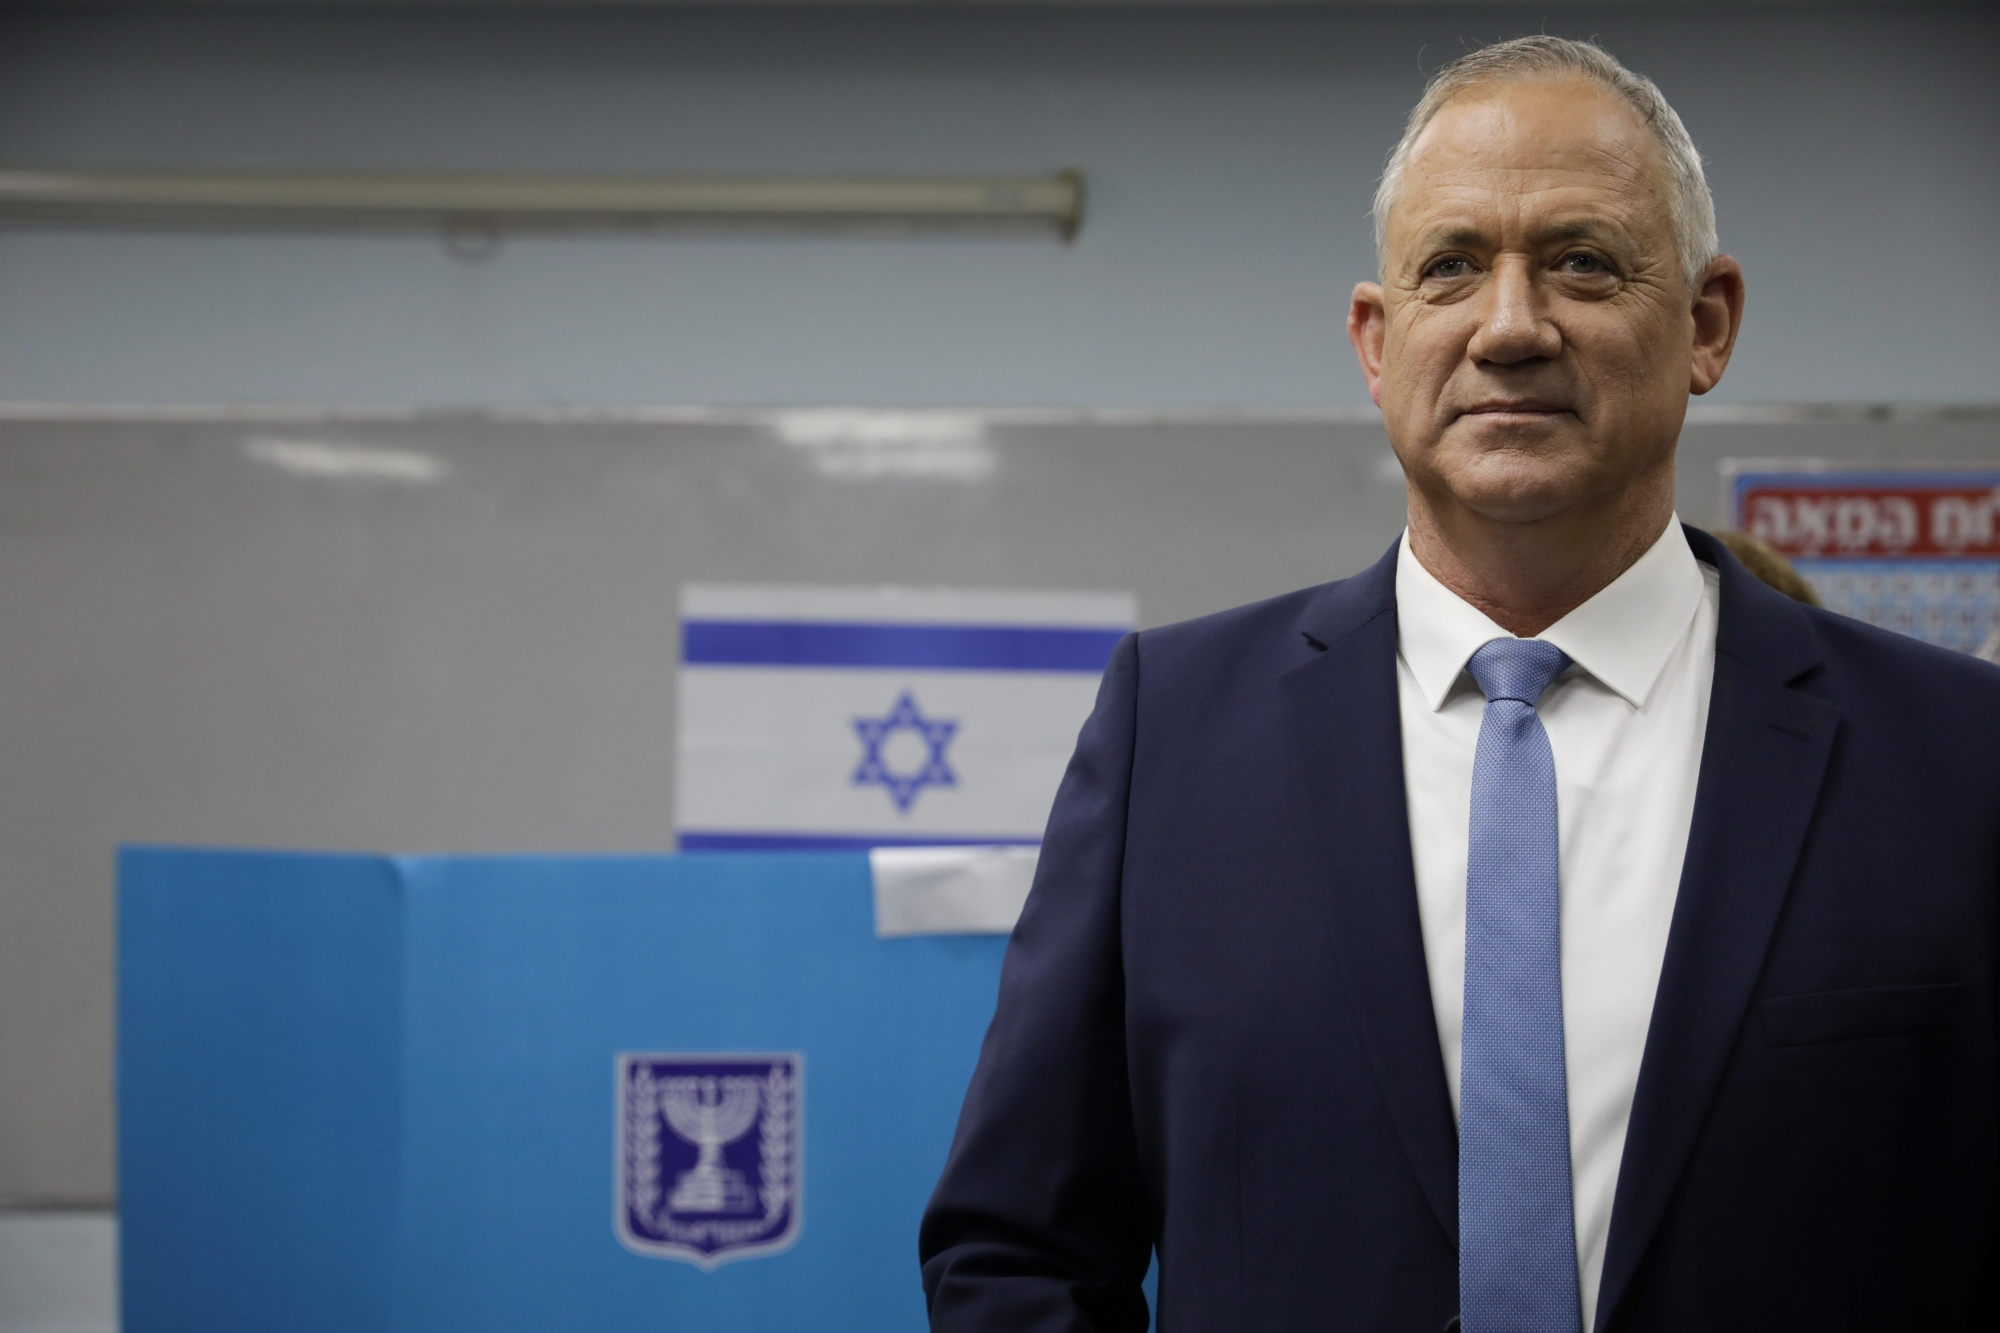 Blue and White party leader Benny Gantz talks to media after casting a ballot in Rosh Haayin, Israel, Monday, March 2, 2020. (AP Photo/Sebastian Scheiner) ArcInfo